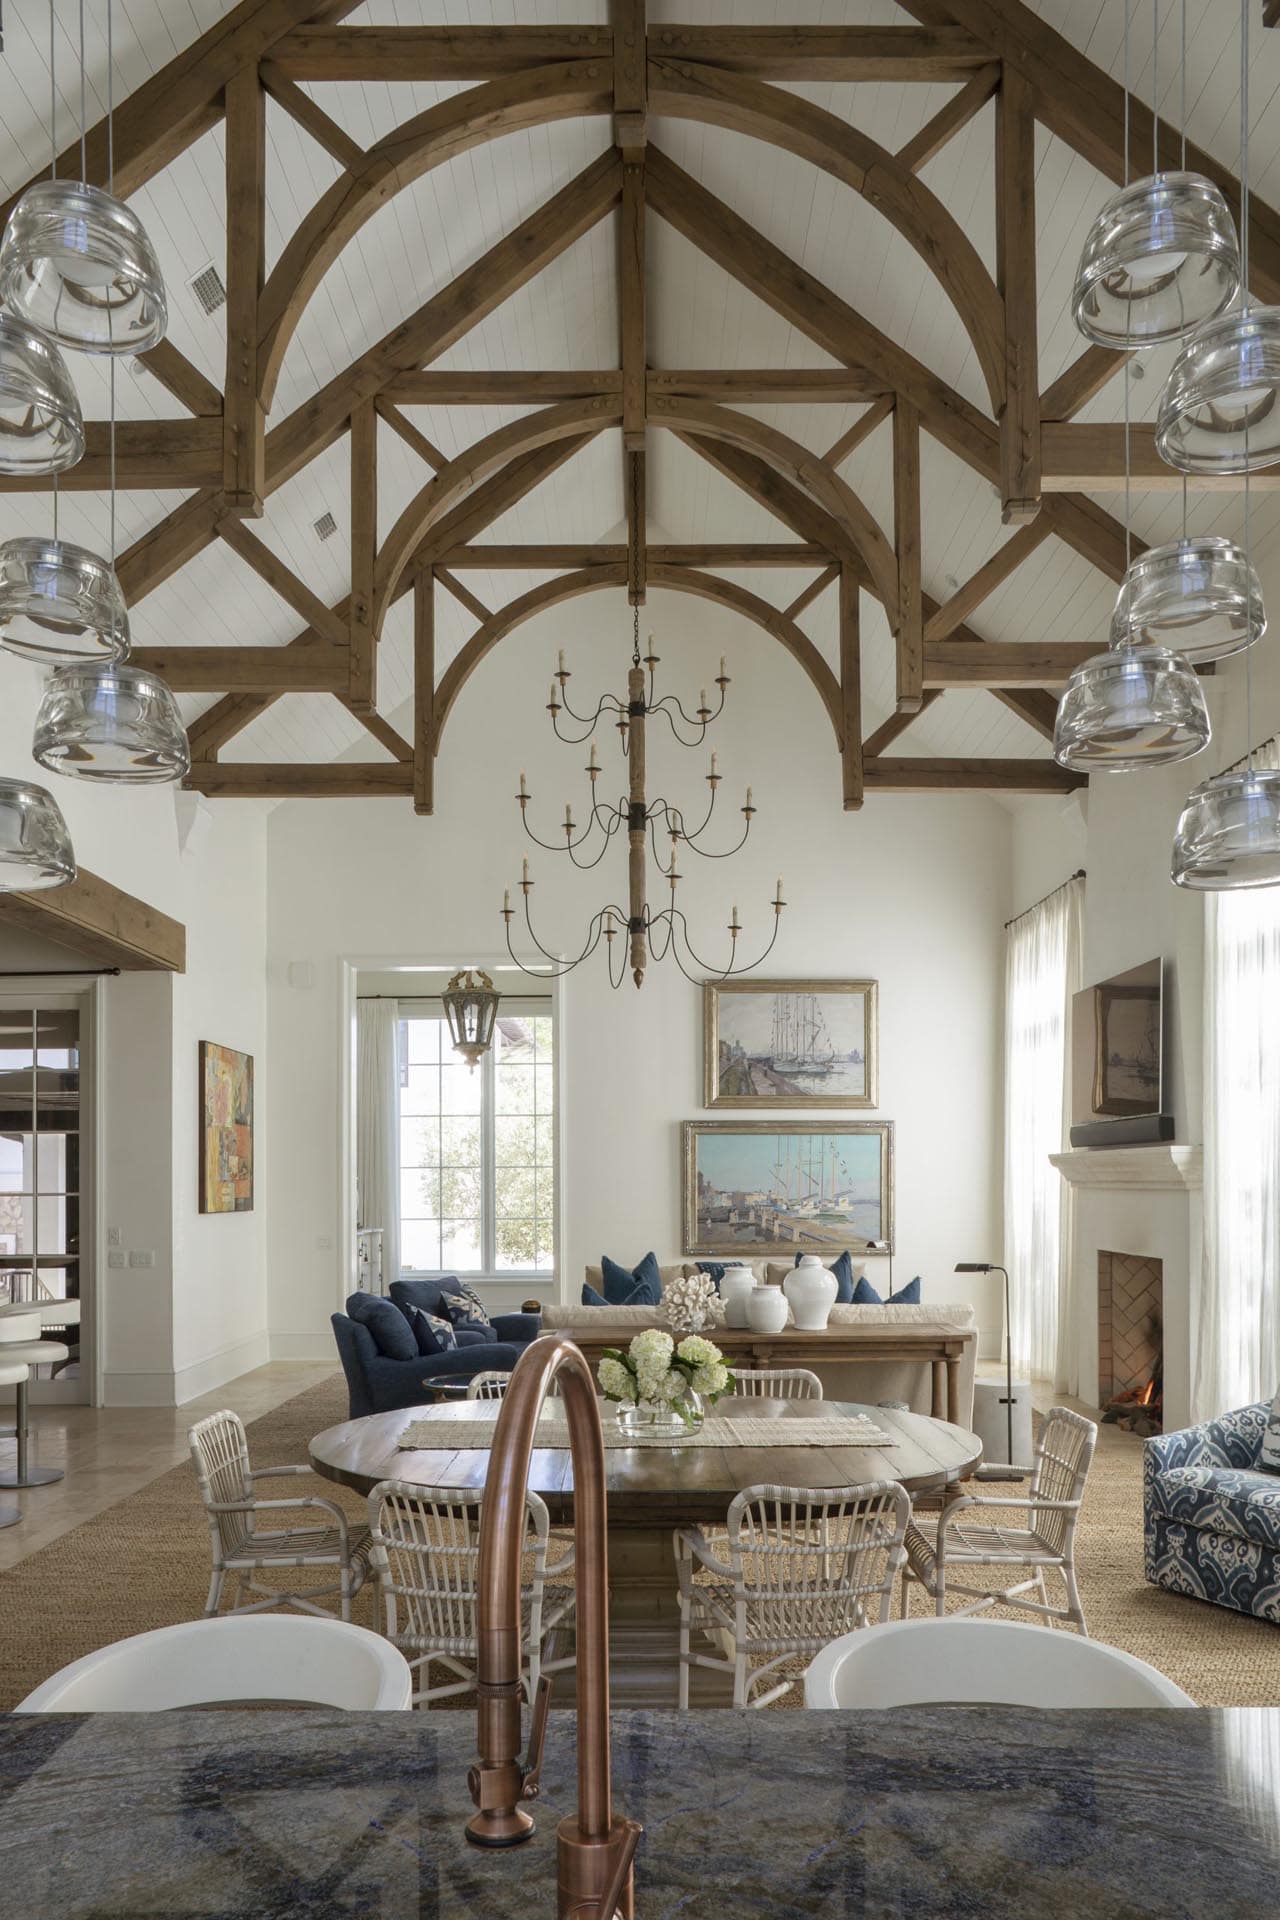 Interior Truss Gallery, Exposed Wood Beams, Heavy Timber, Components